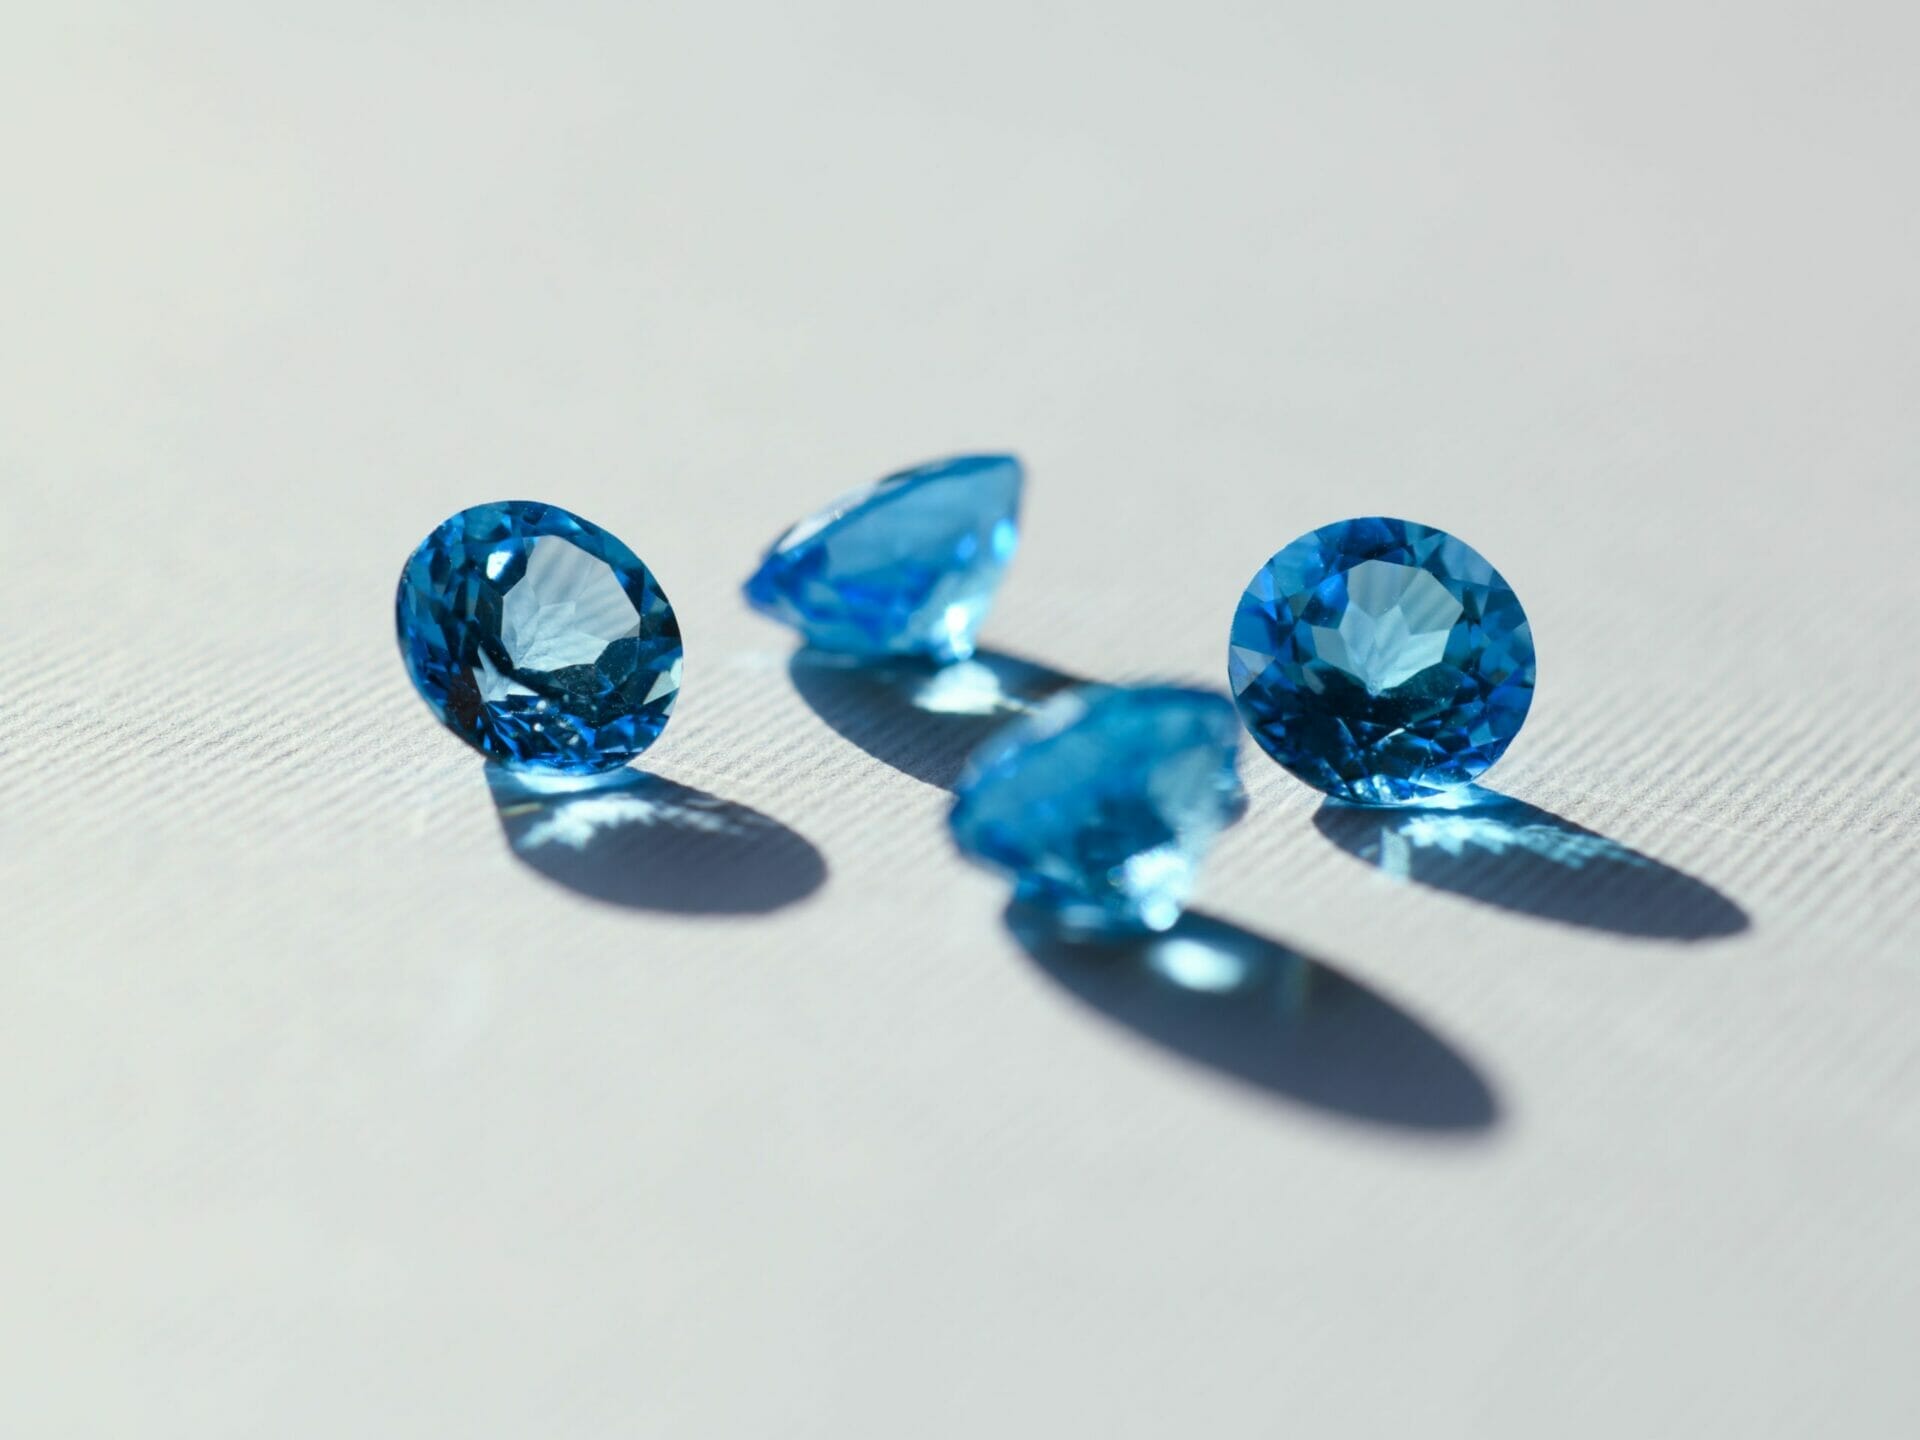 Blue sapphires bring capricorns inner strength and clarity of thought